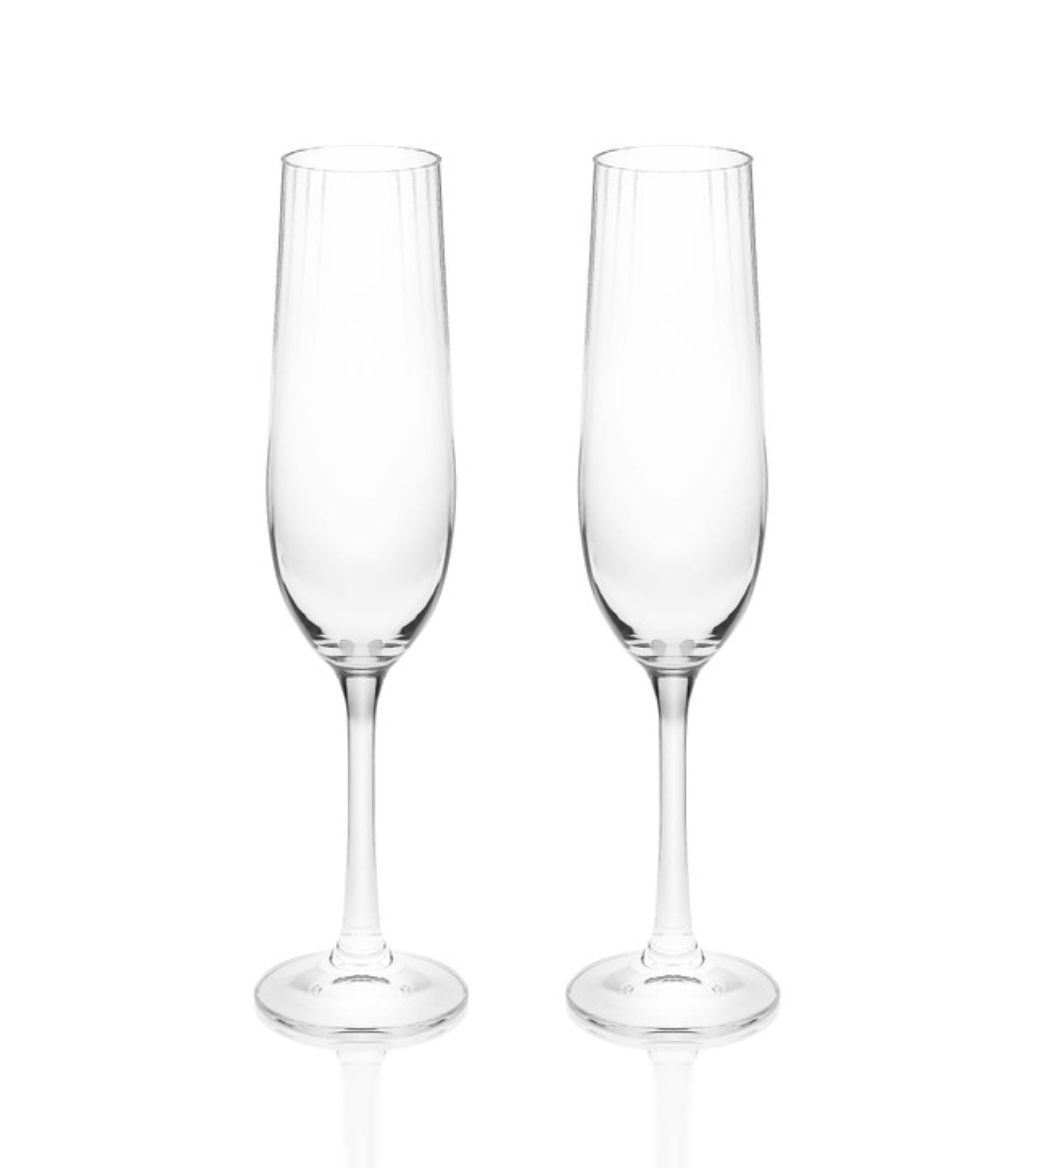 Ripple S/2 Crystal Champagne Glasses